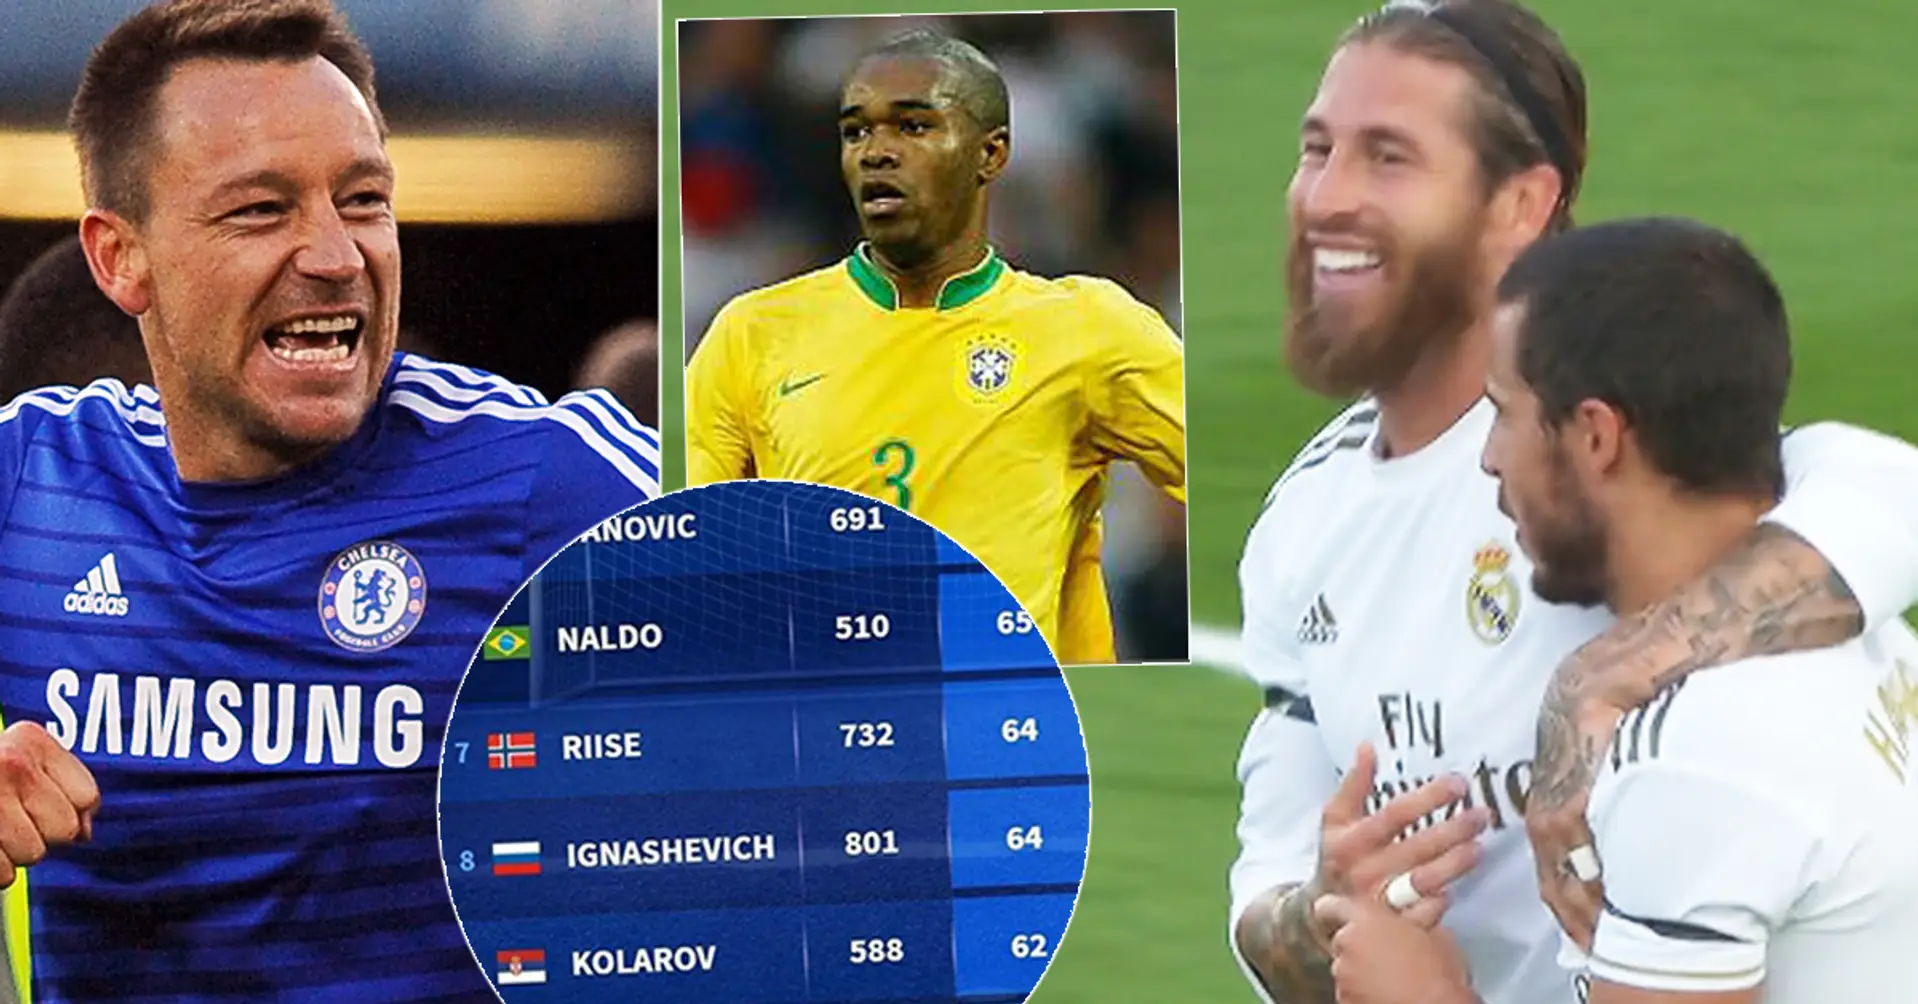 Highest scoring defenders of 21st century have been revealed – they're absolute goal machines